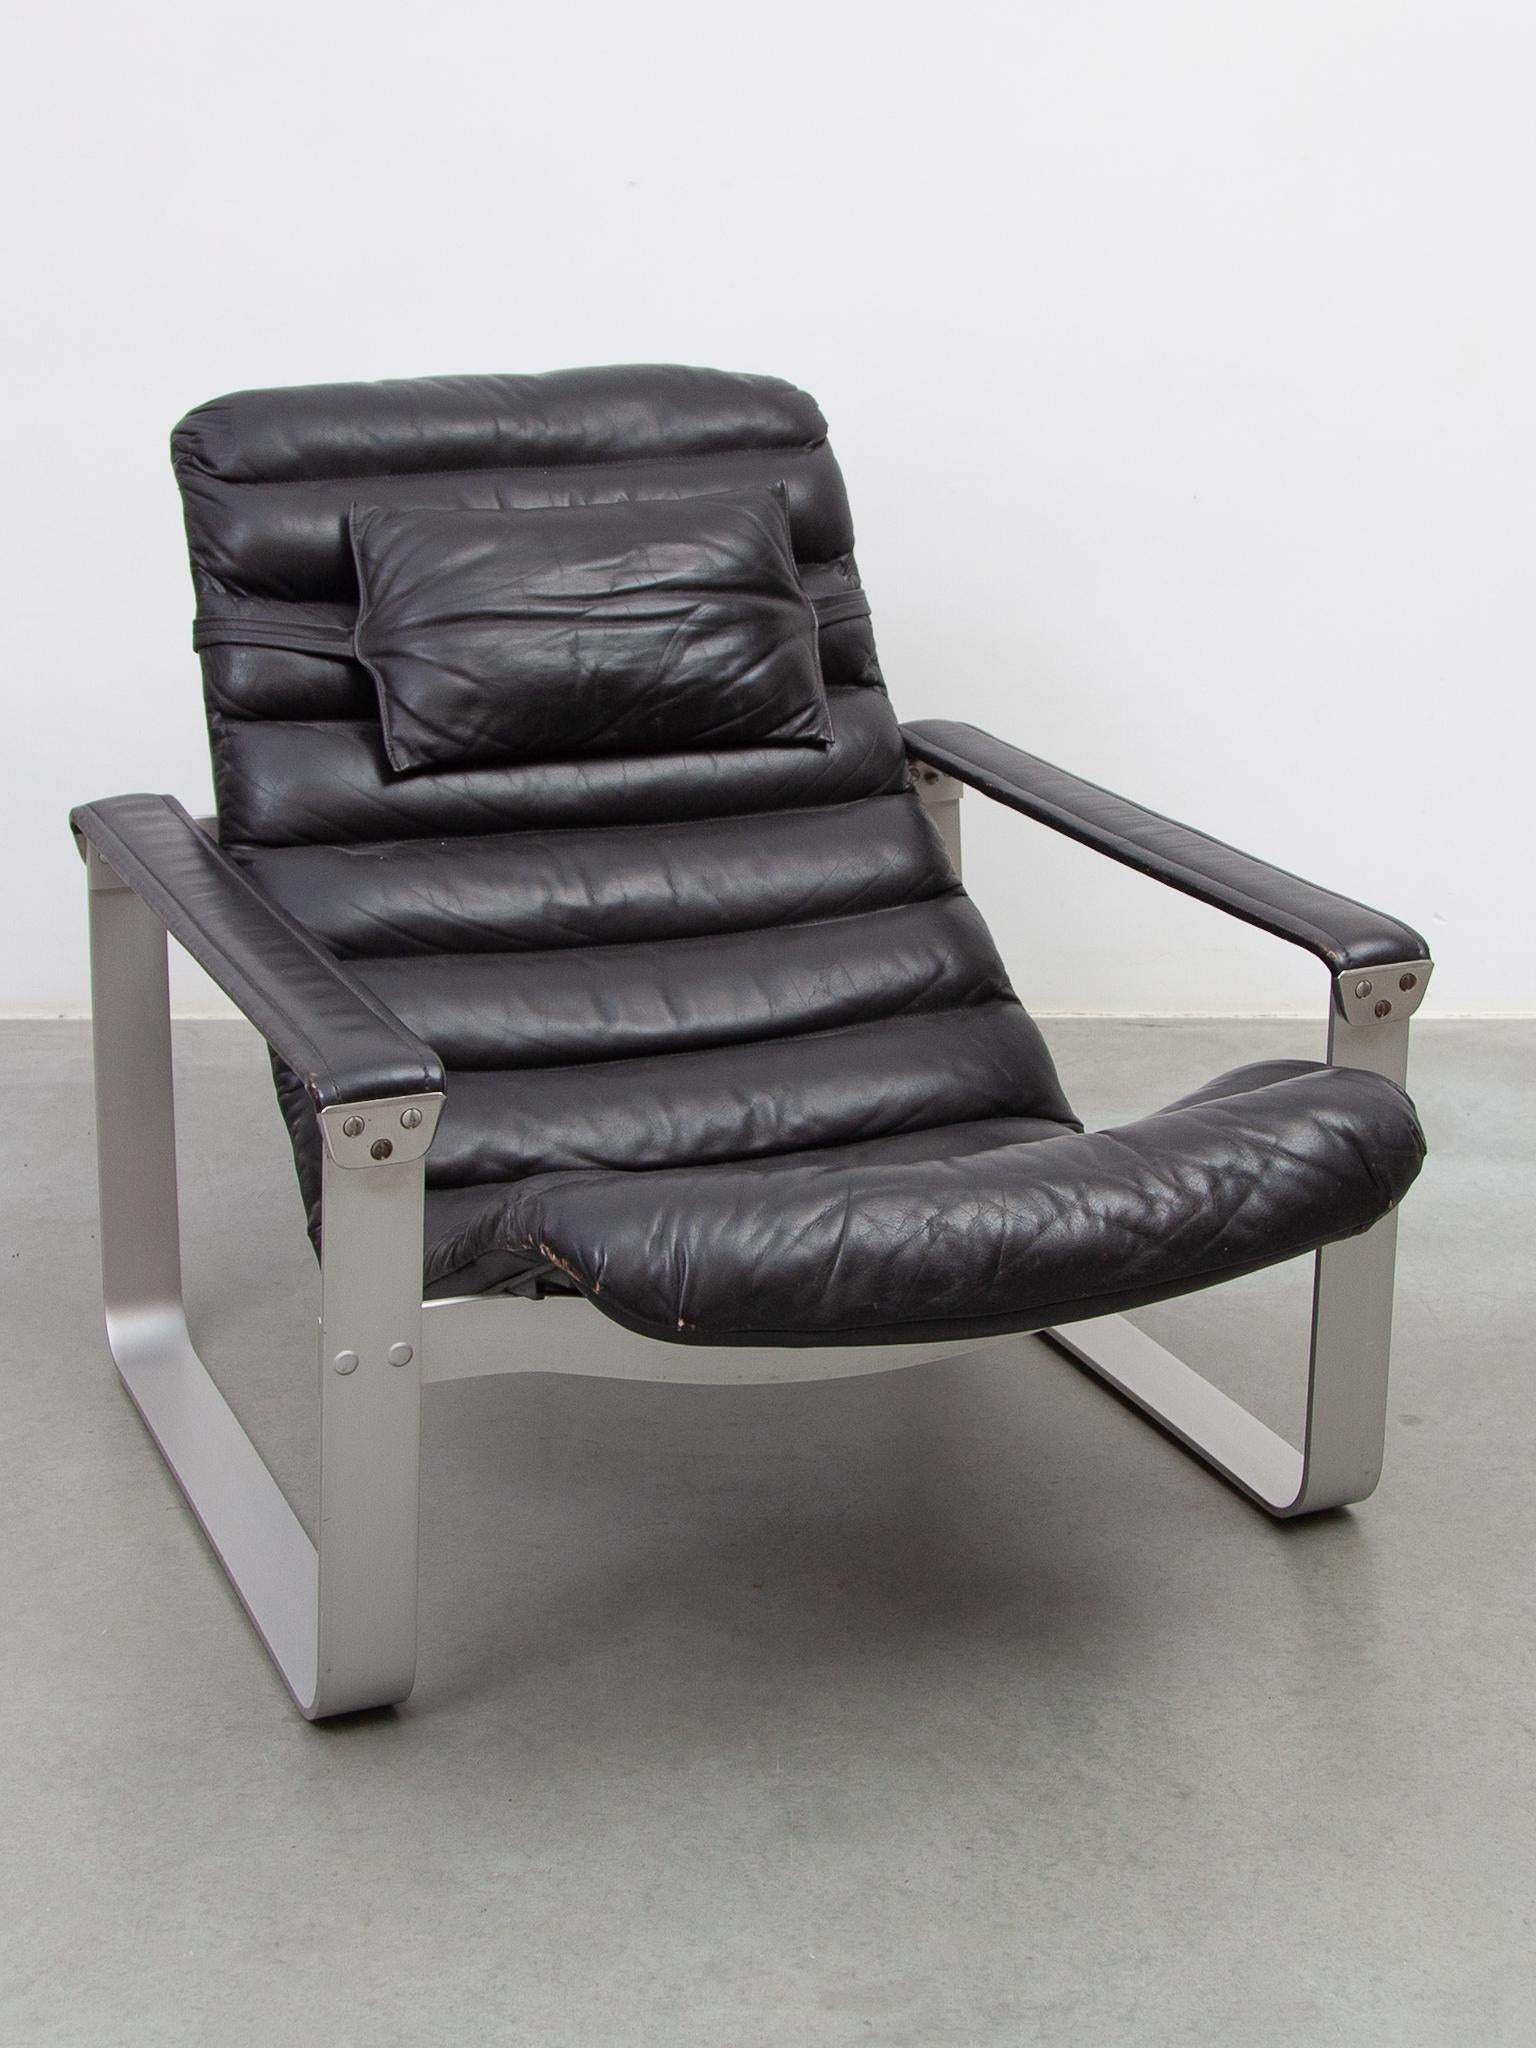 Mid-20th Century Pulkka Lounge Chair designed by Ilmari Lappalainen by ASKO, Finland, 1968 For Sale